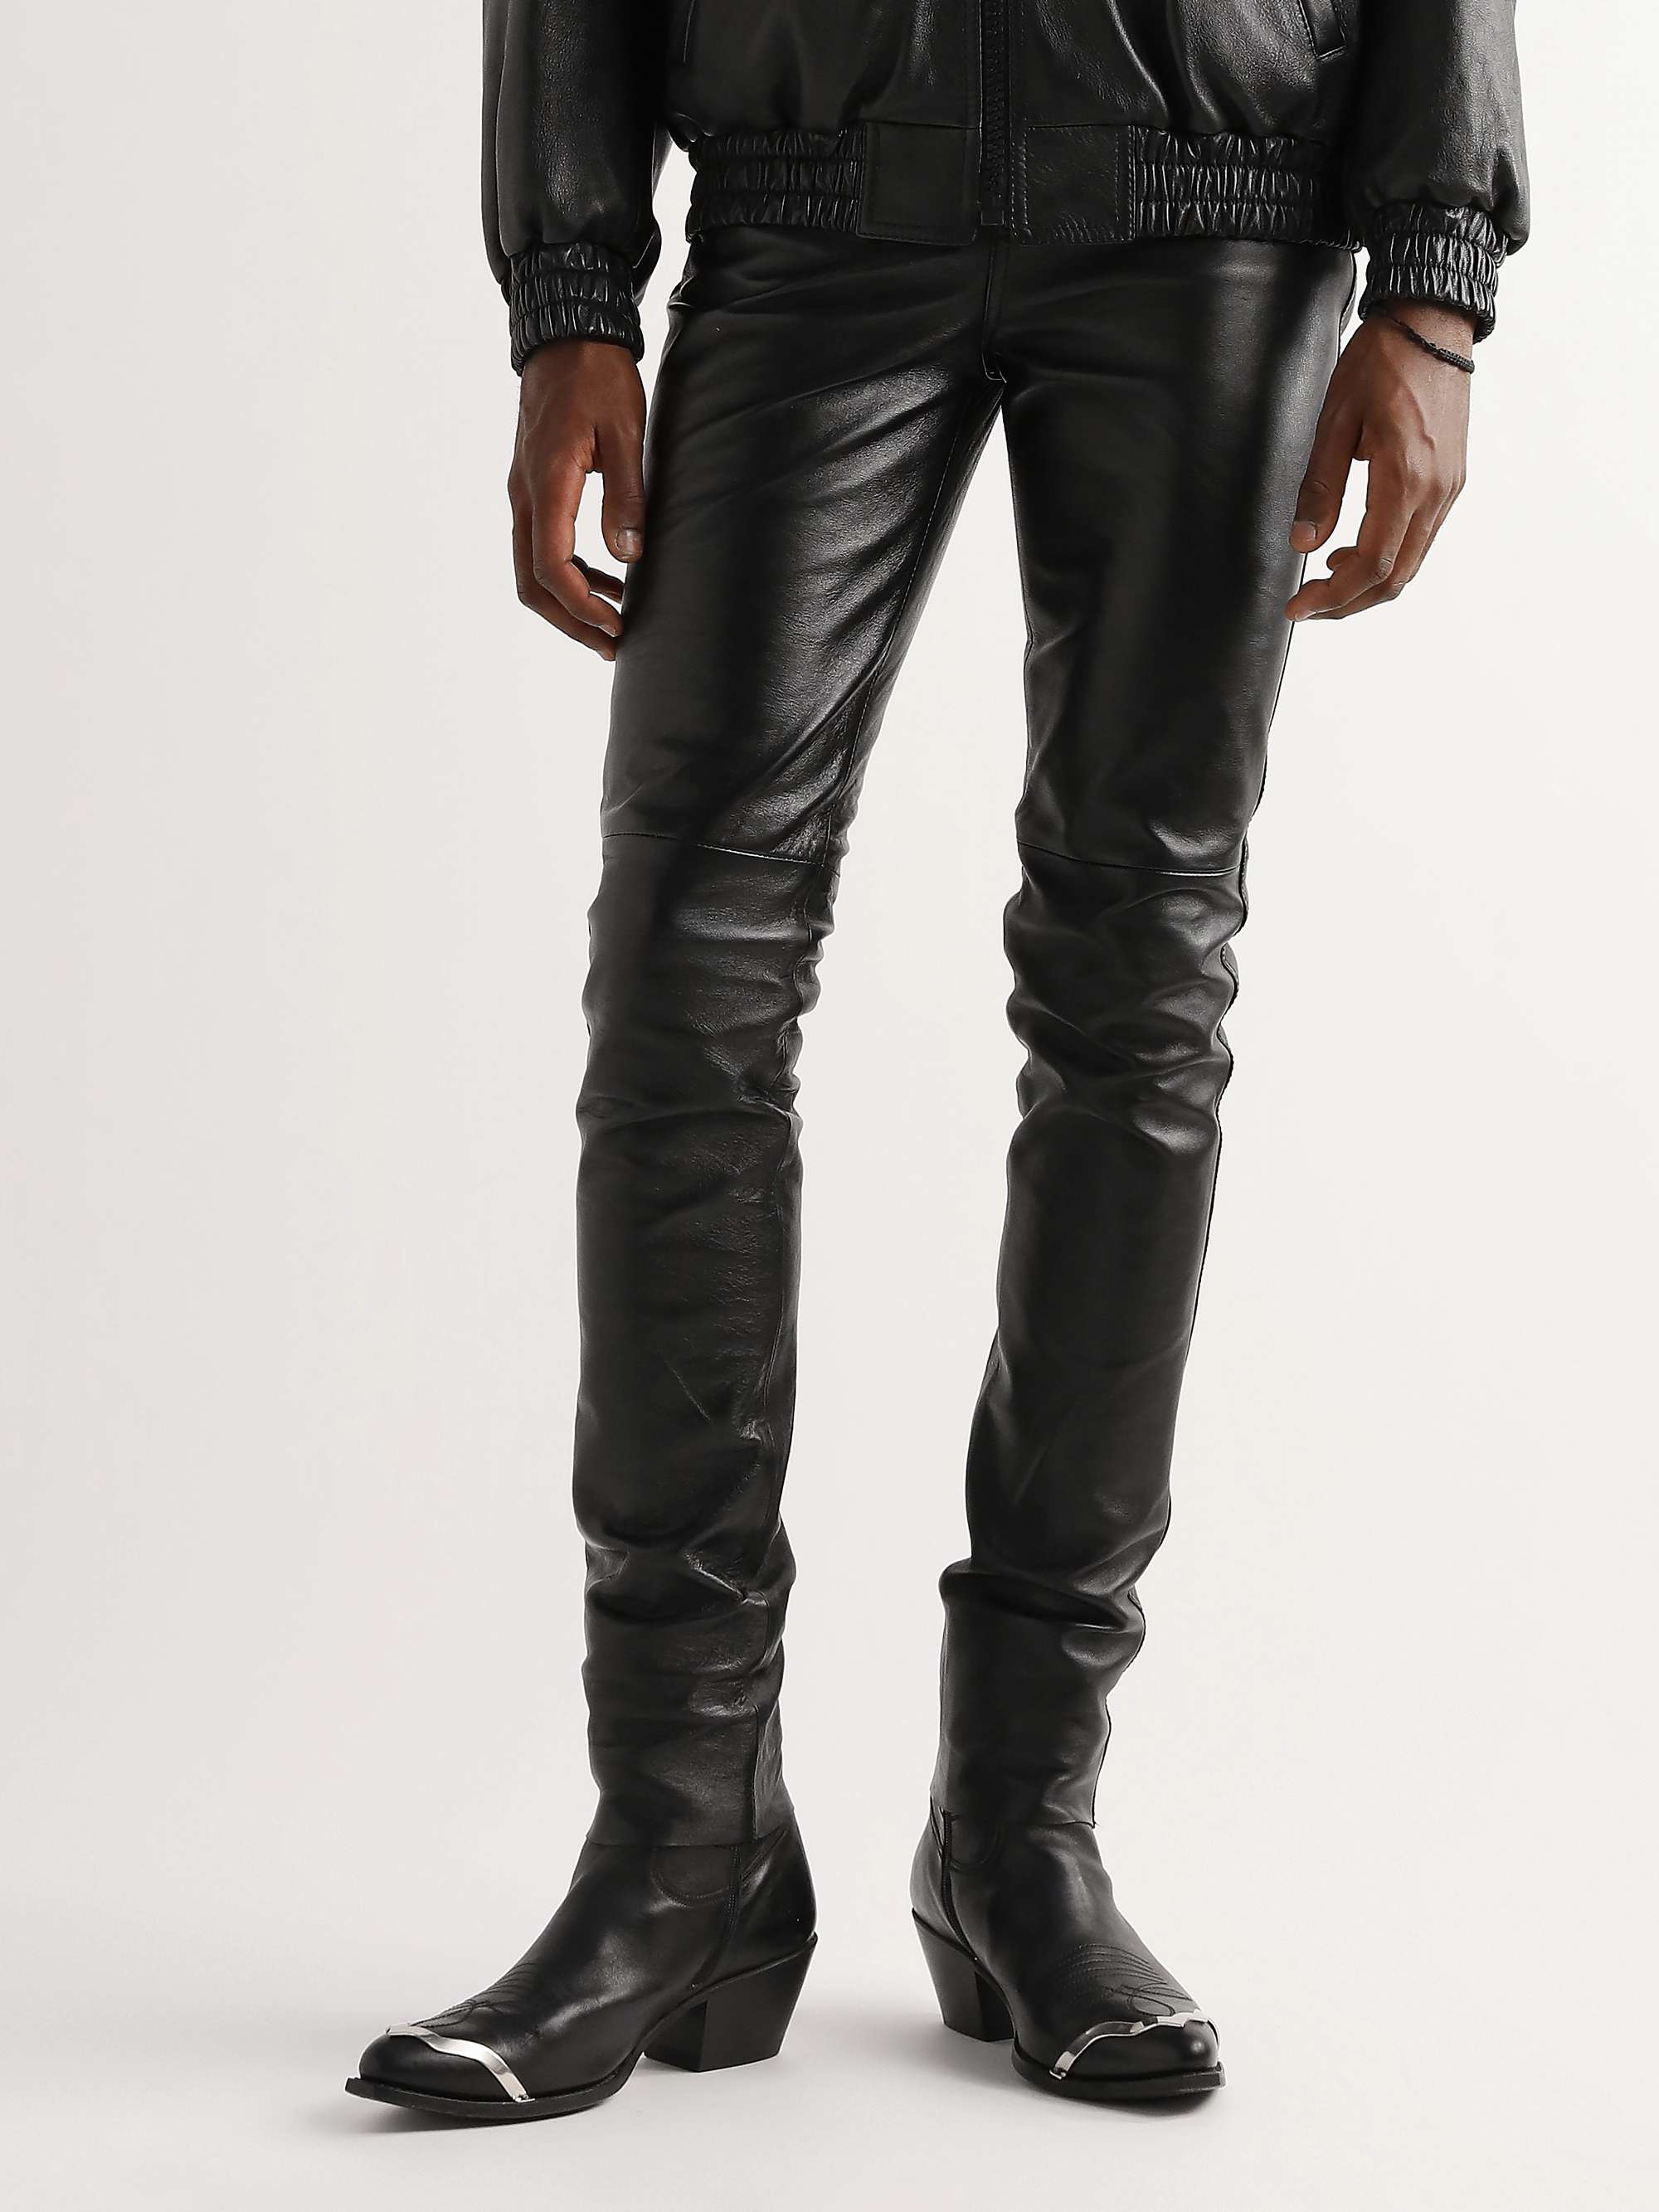 Share 85+ male leather trousers best - in.cdgdbentre